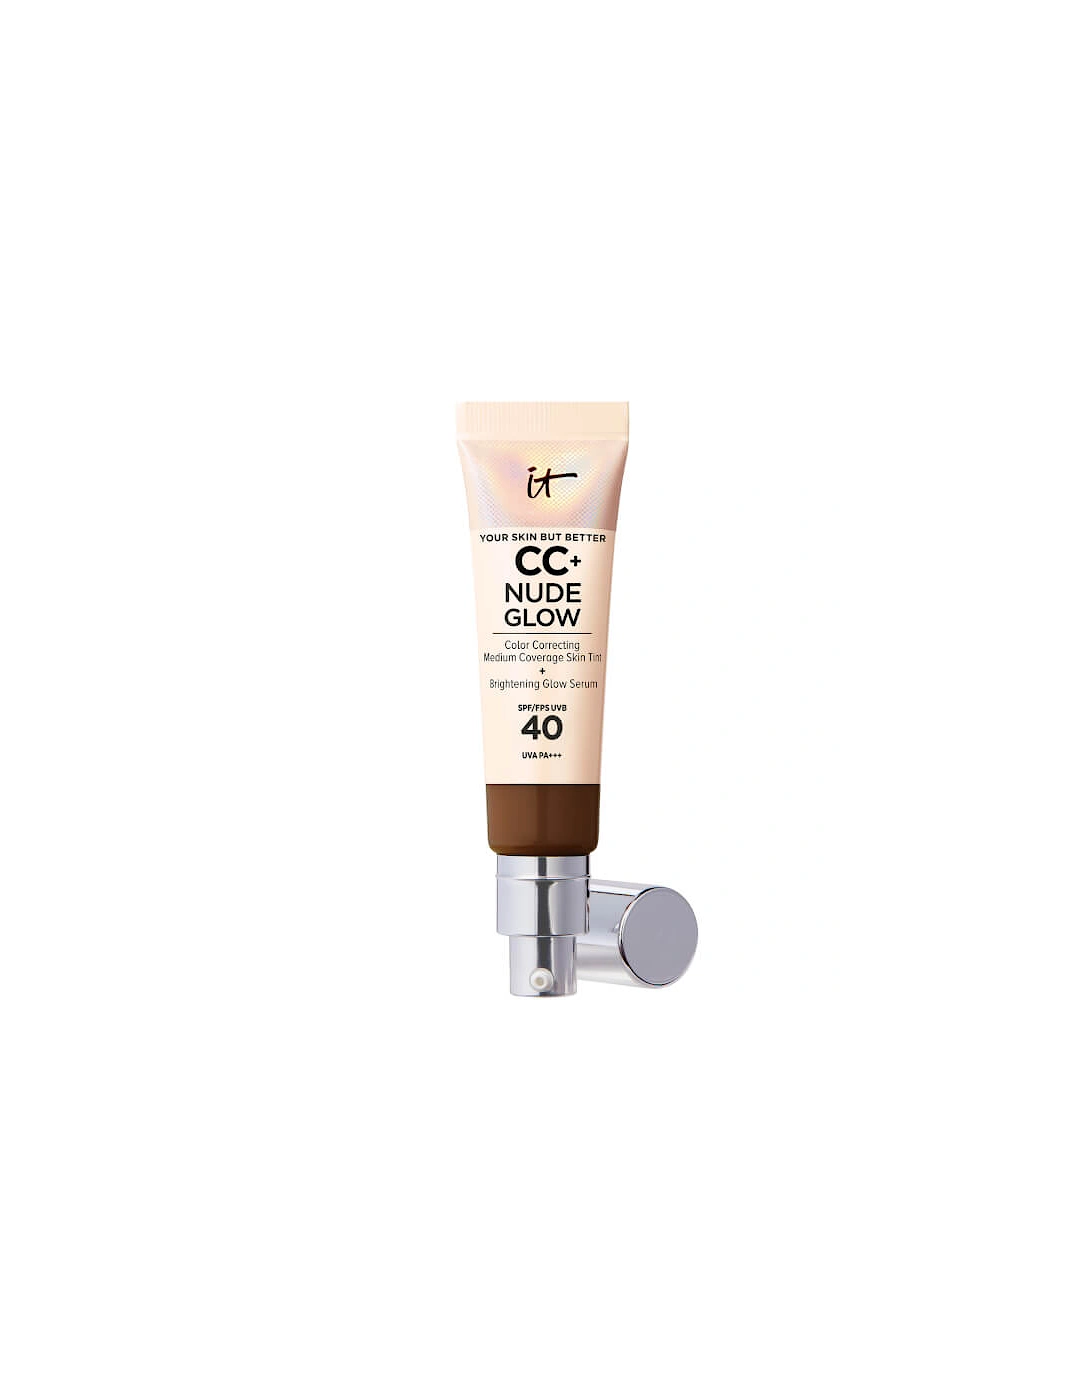 CC+ and Nude Glow Lightweight Foundation and Glow Serum with SPF40 - Neutral Deep, 2 of 1